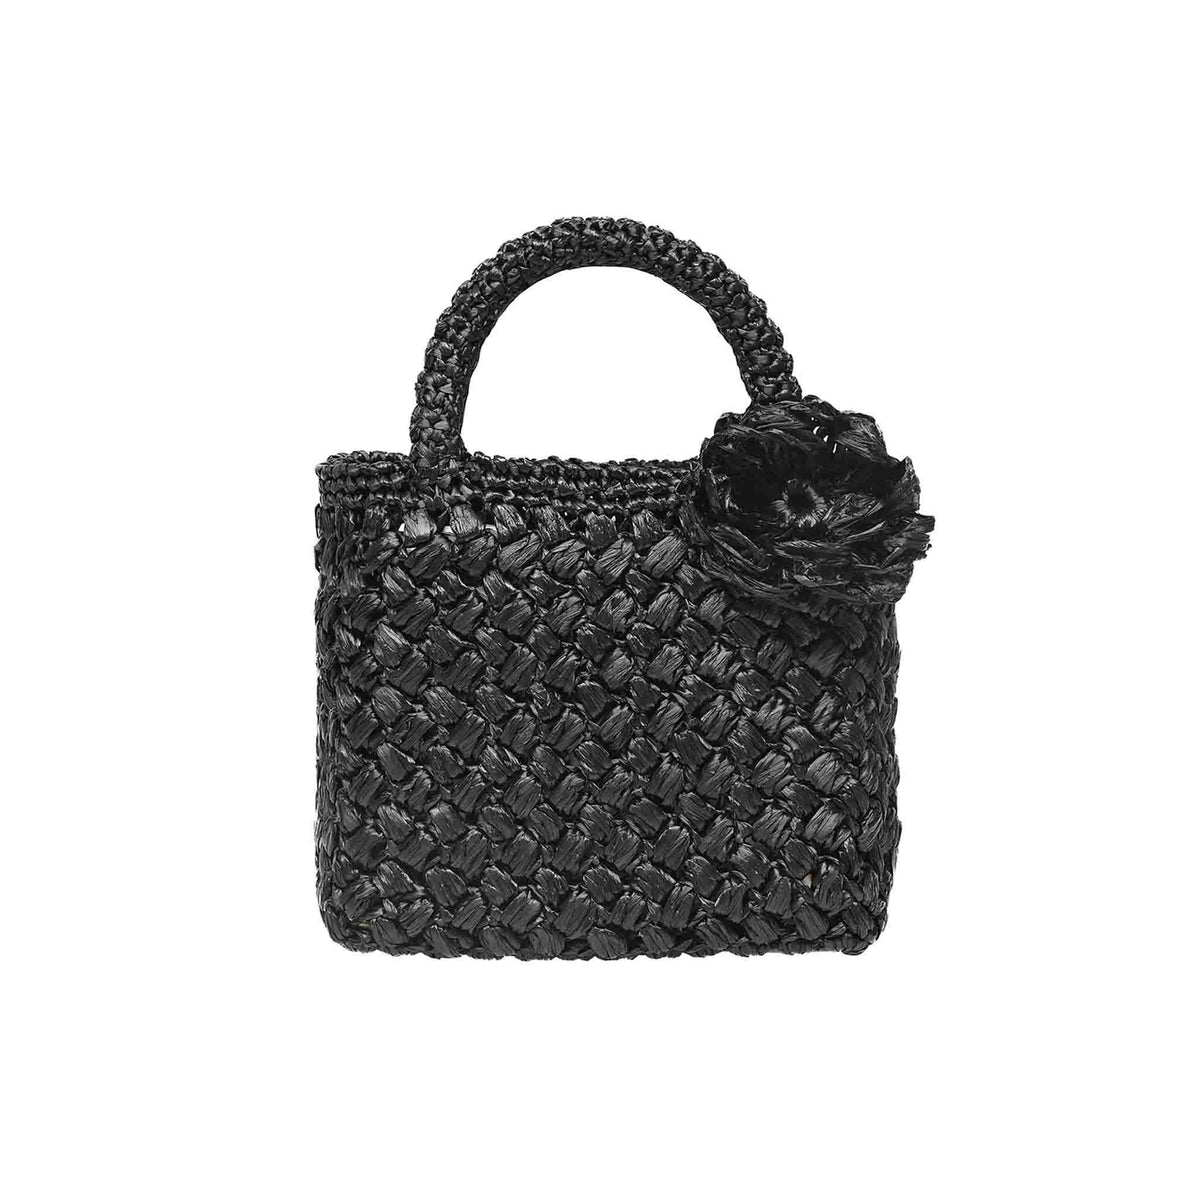 Mini Carmen Sol black raffia small tote bag adds a touch of chic to your shopping and vacation ensemble made in Italy.